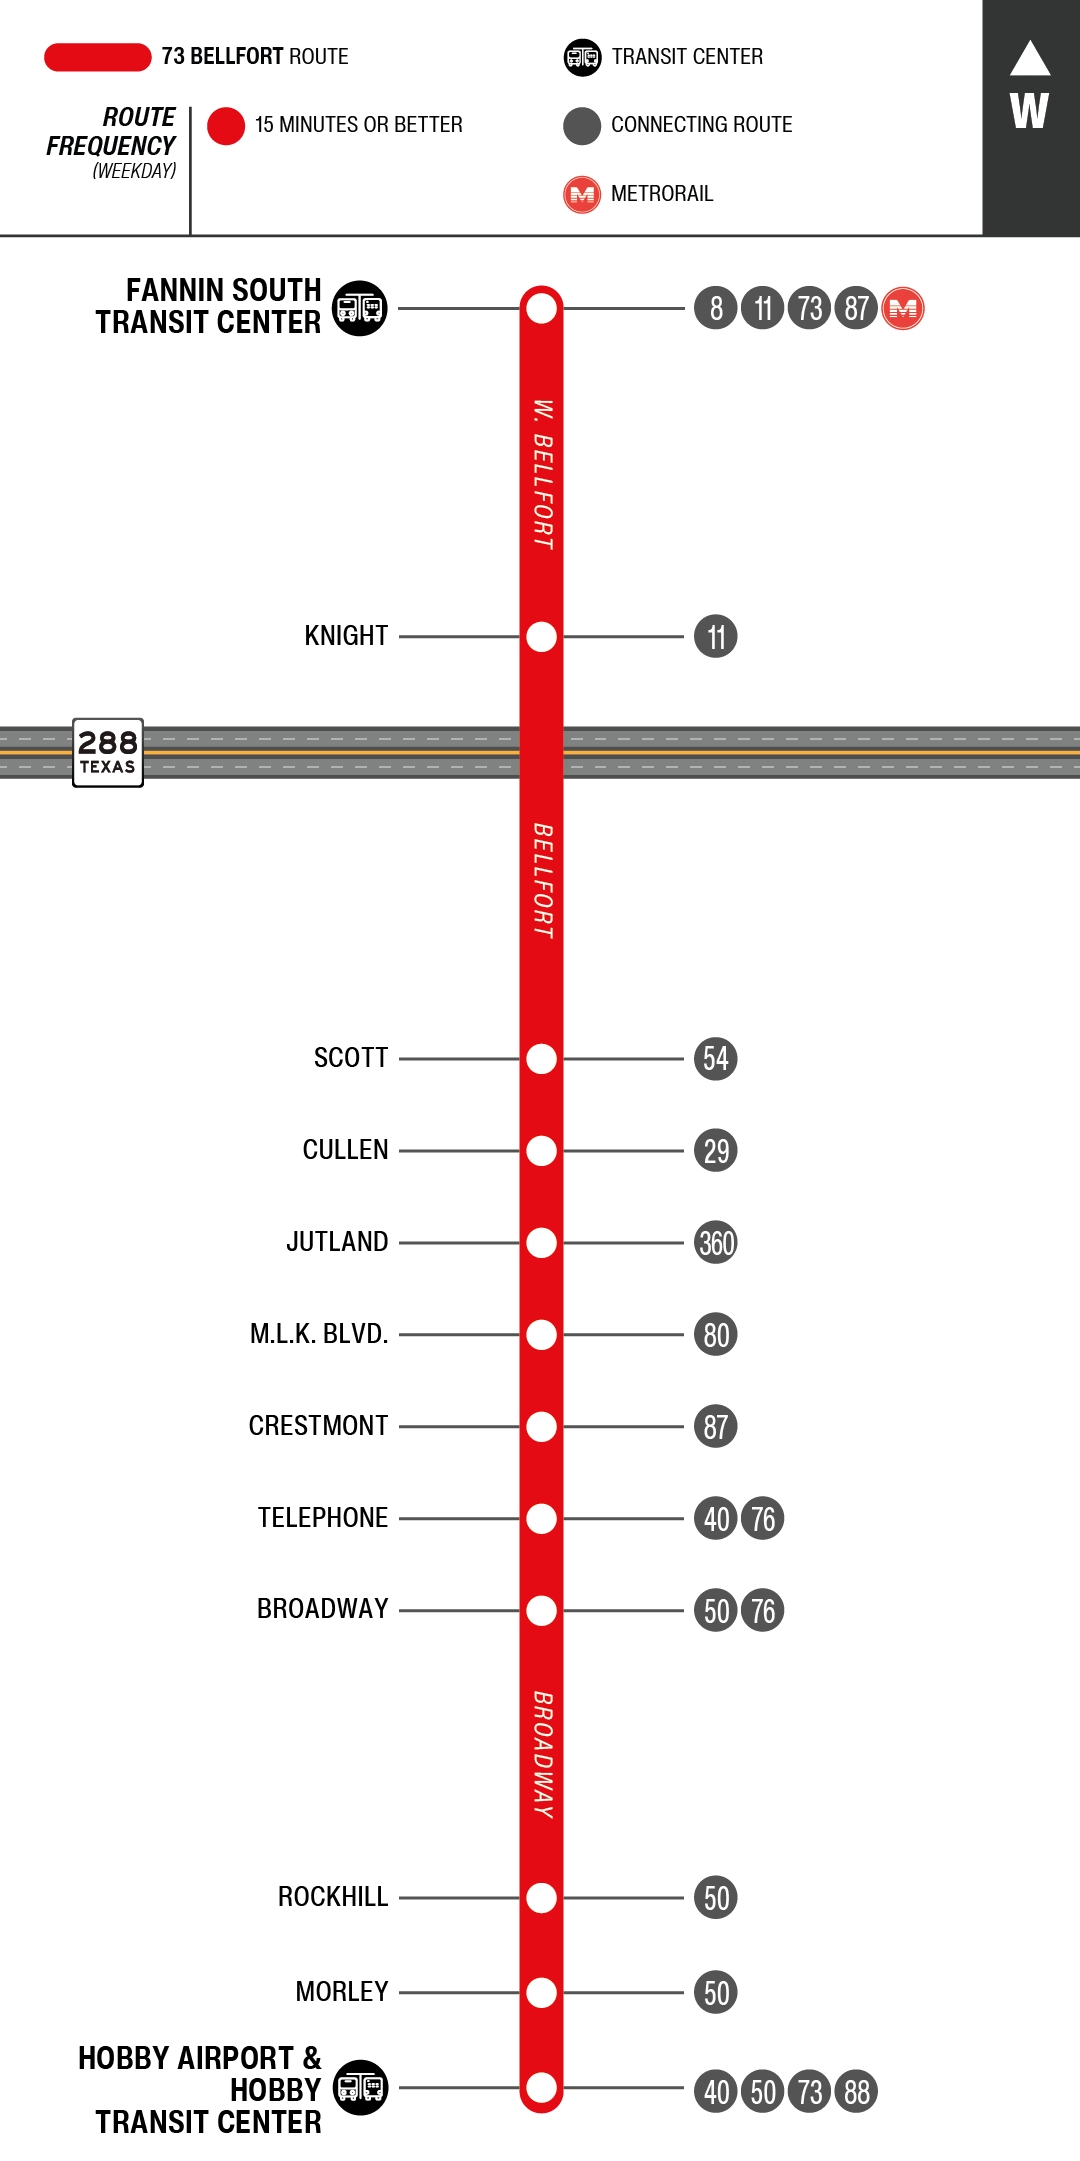 Route map for 73 Bellfort bus